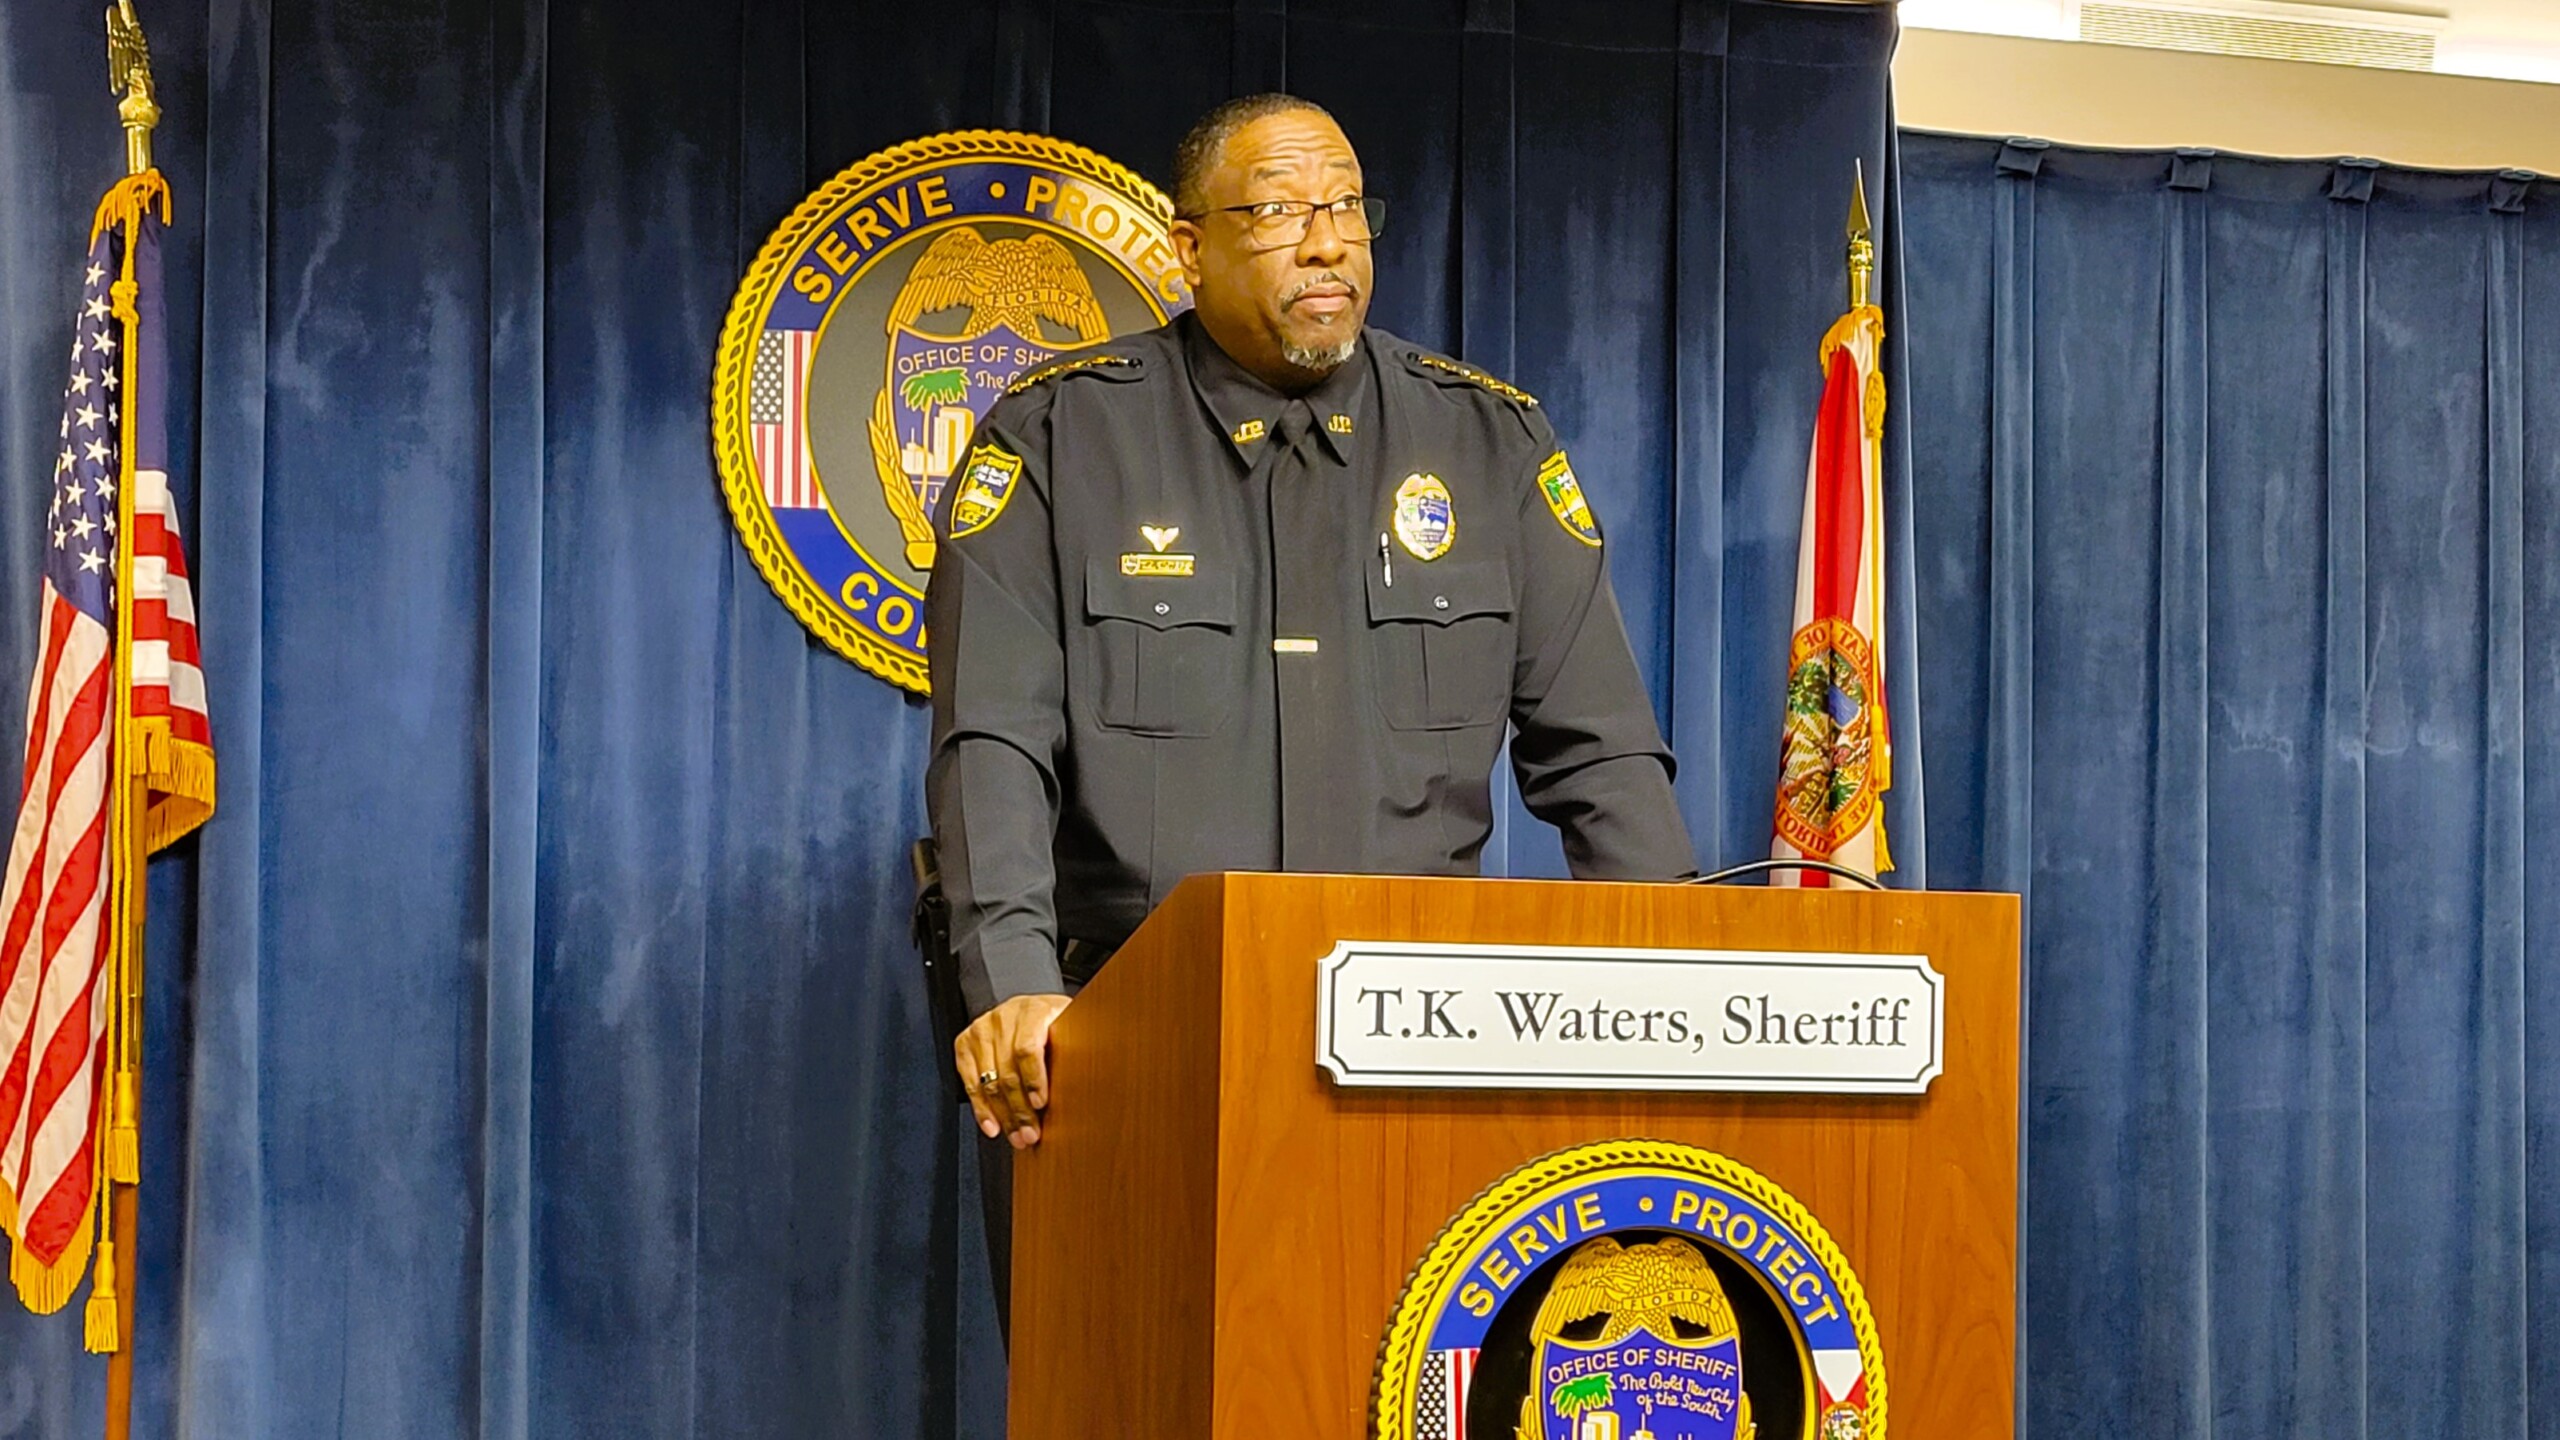 Featured image for “Jacksonville’s new sheriff promises more openness”